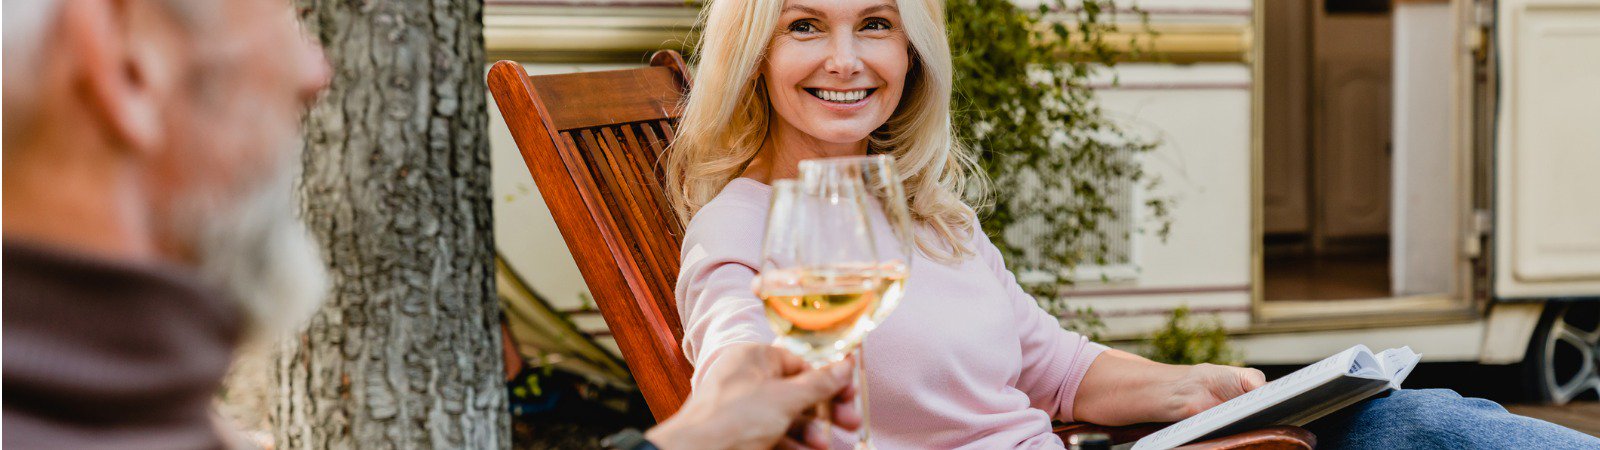 woman in deck chair clinking wine glass with man